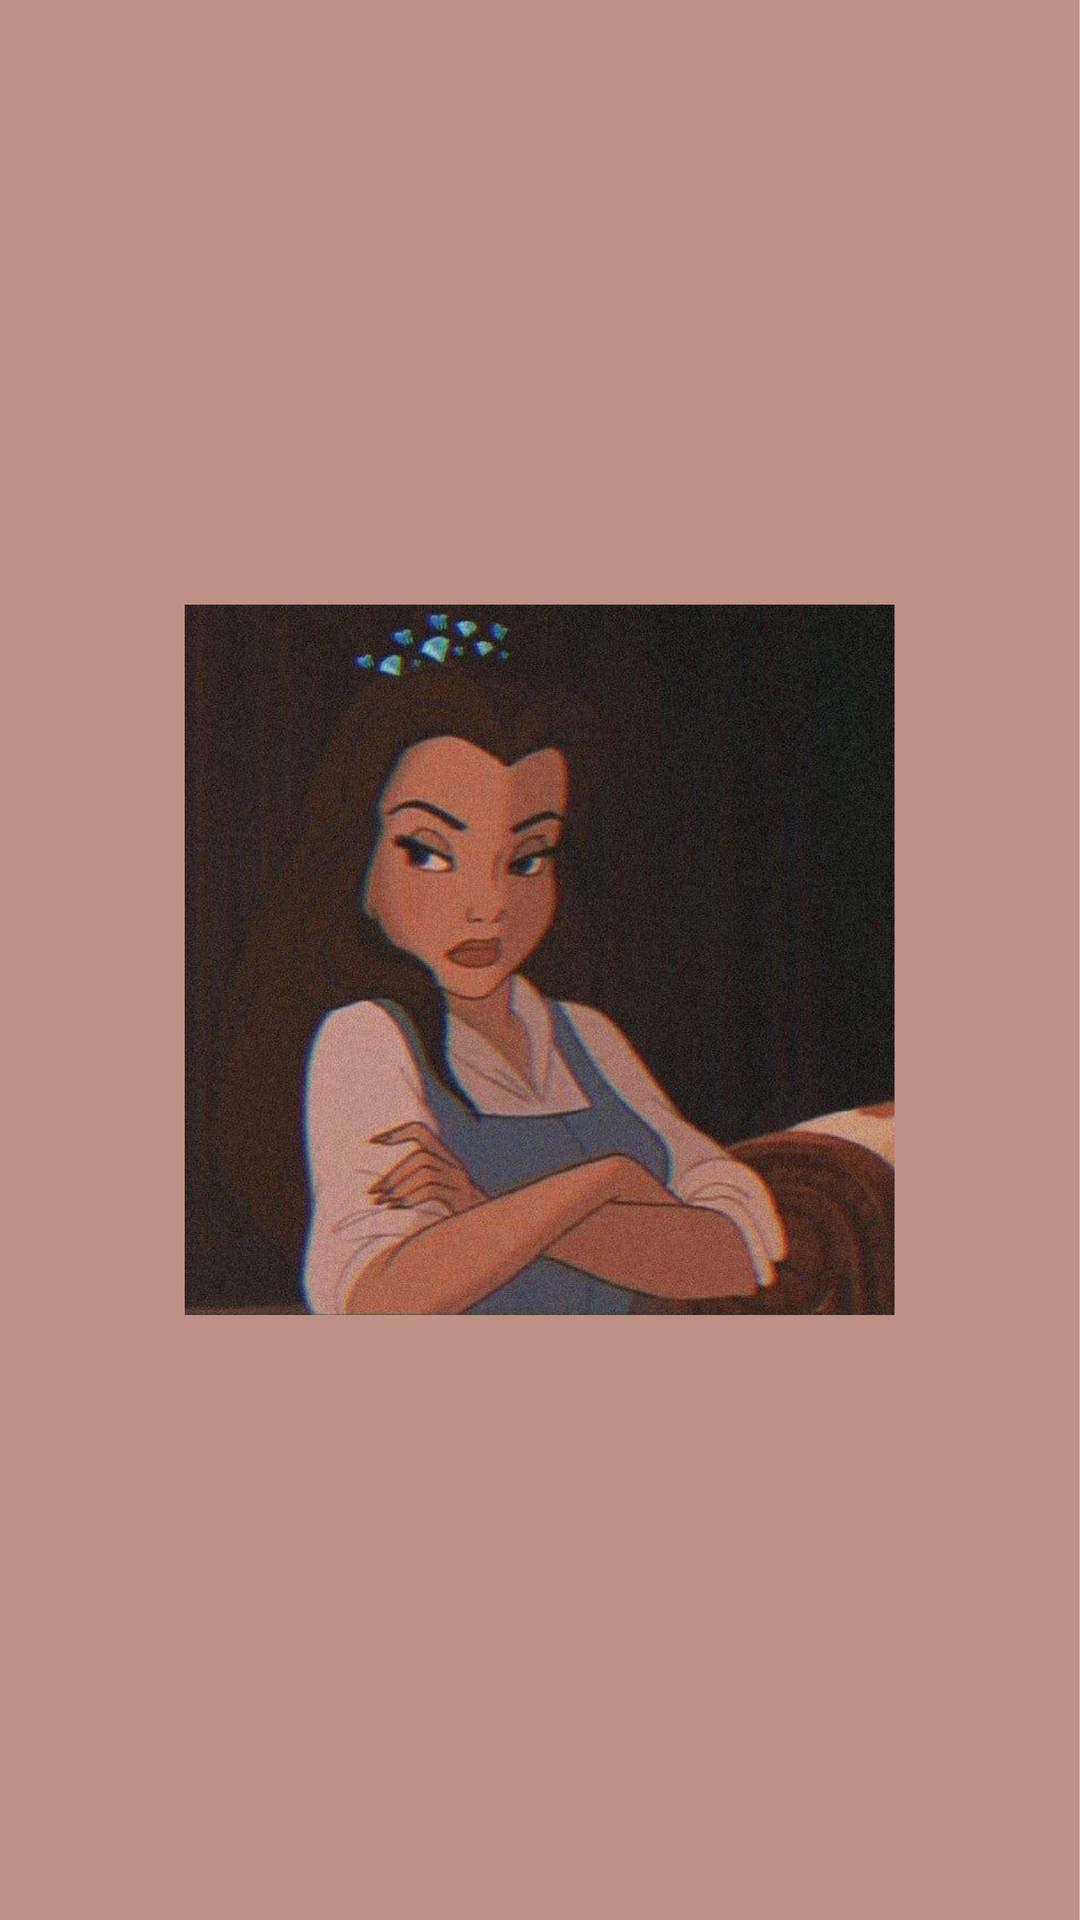 Disney Princess mobile wallpaper collection - YouLoveIt.com